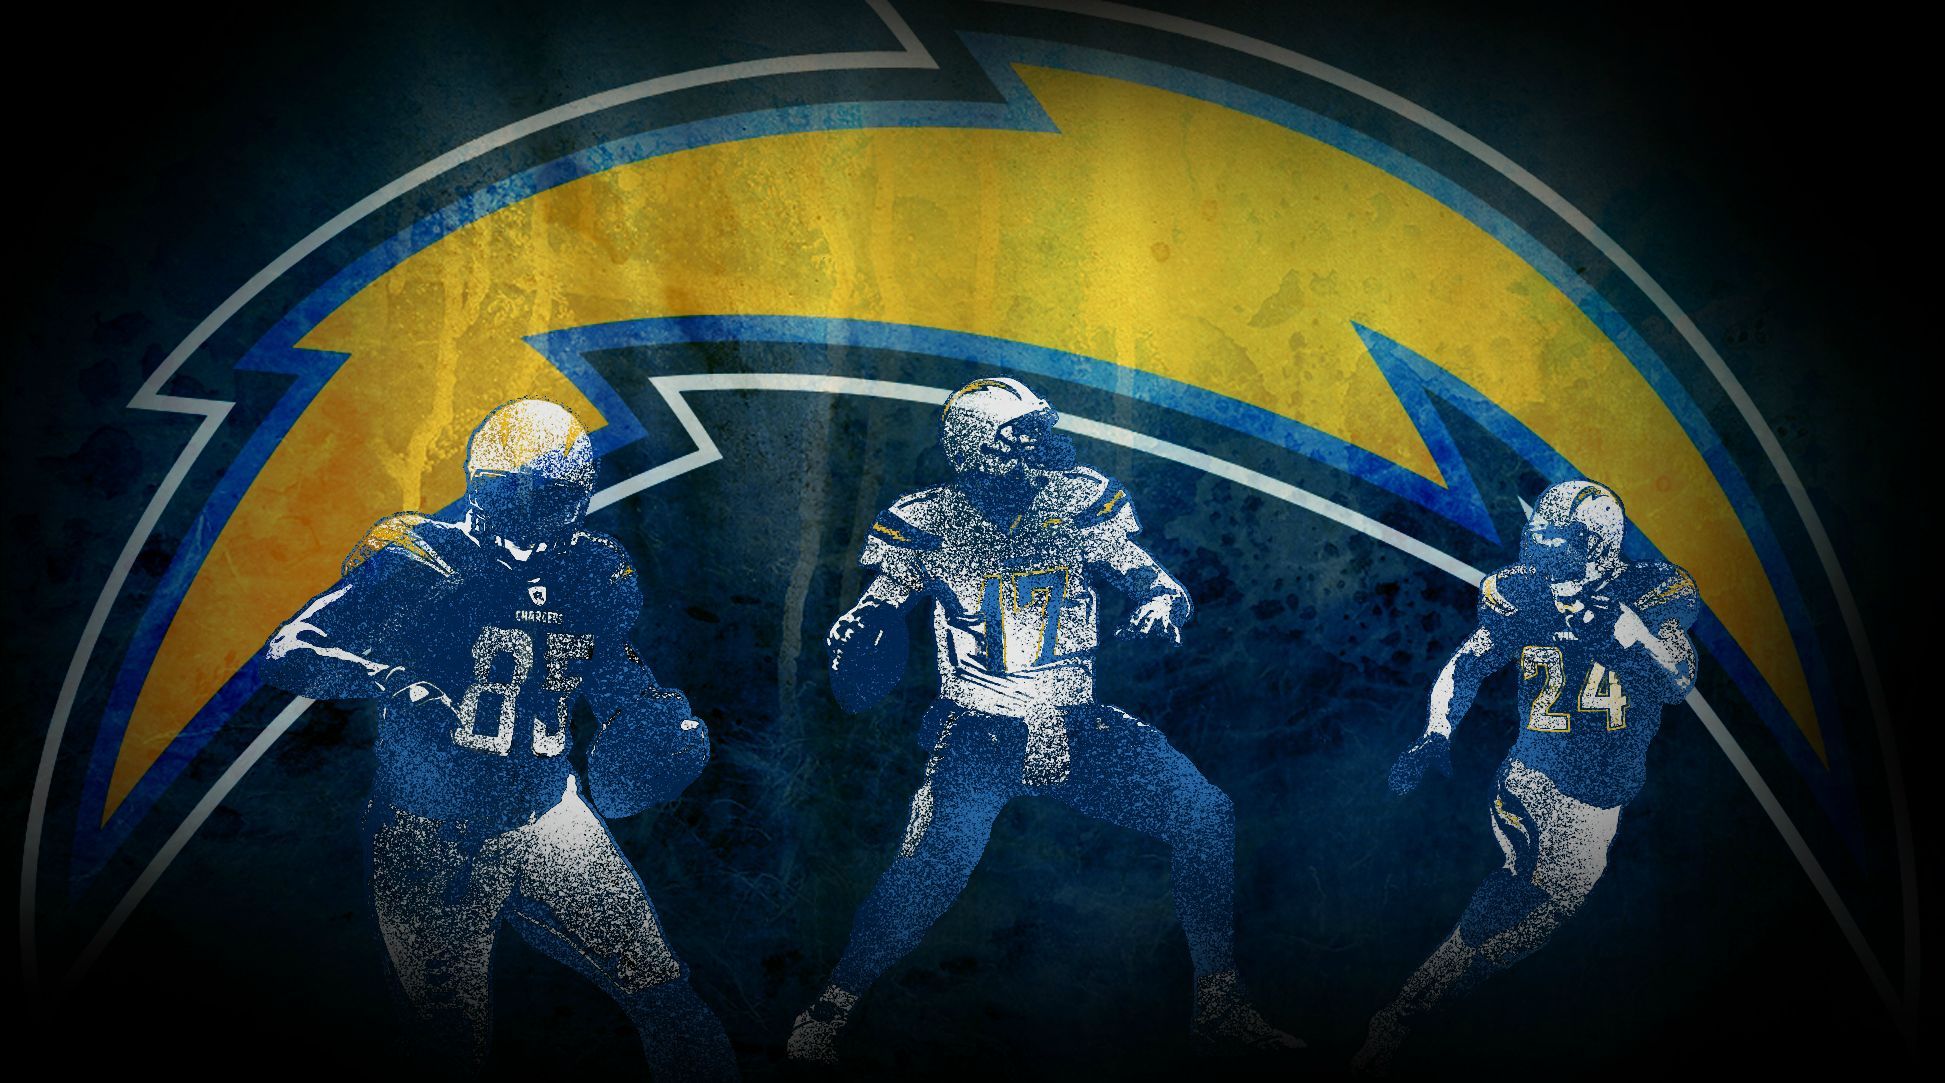 San Diego Chargers Wallpaper I Made : nfl